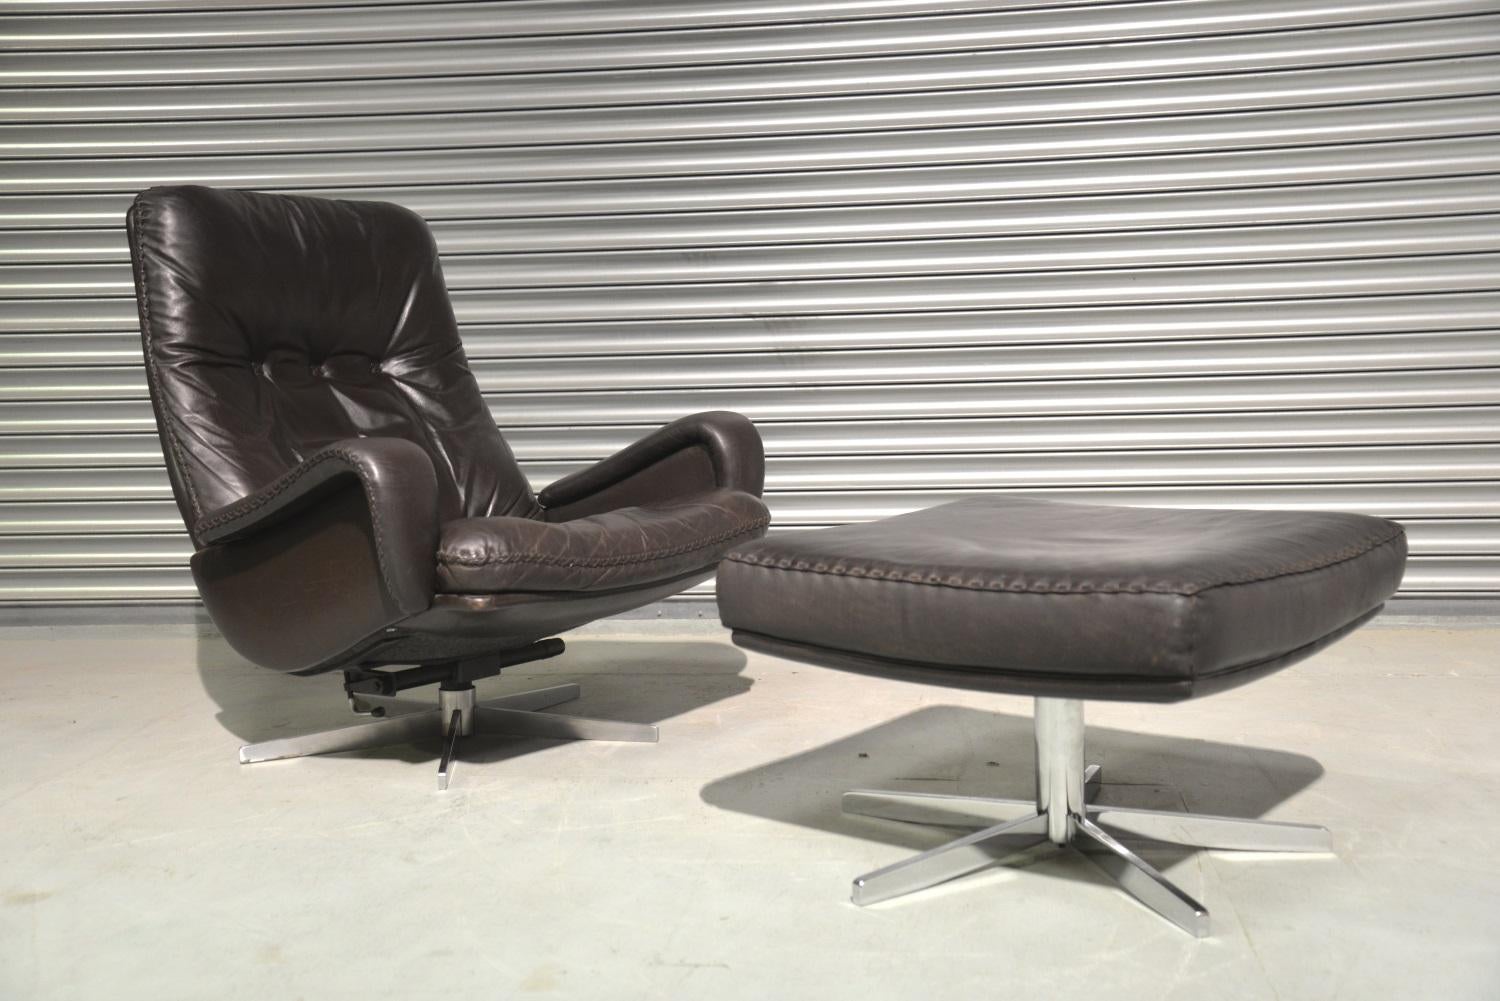 Discounted airfreight for our US and International customers (from 2 weeks door to door)

We are delighted to bring to you an ultra-rare and highly desirable Vintage 1960s De Sede S 231 James Bond swivel lounge armchair with ottoman. This same